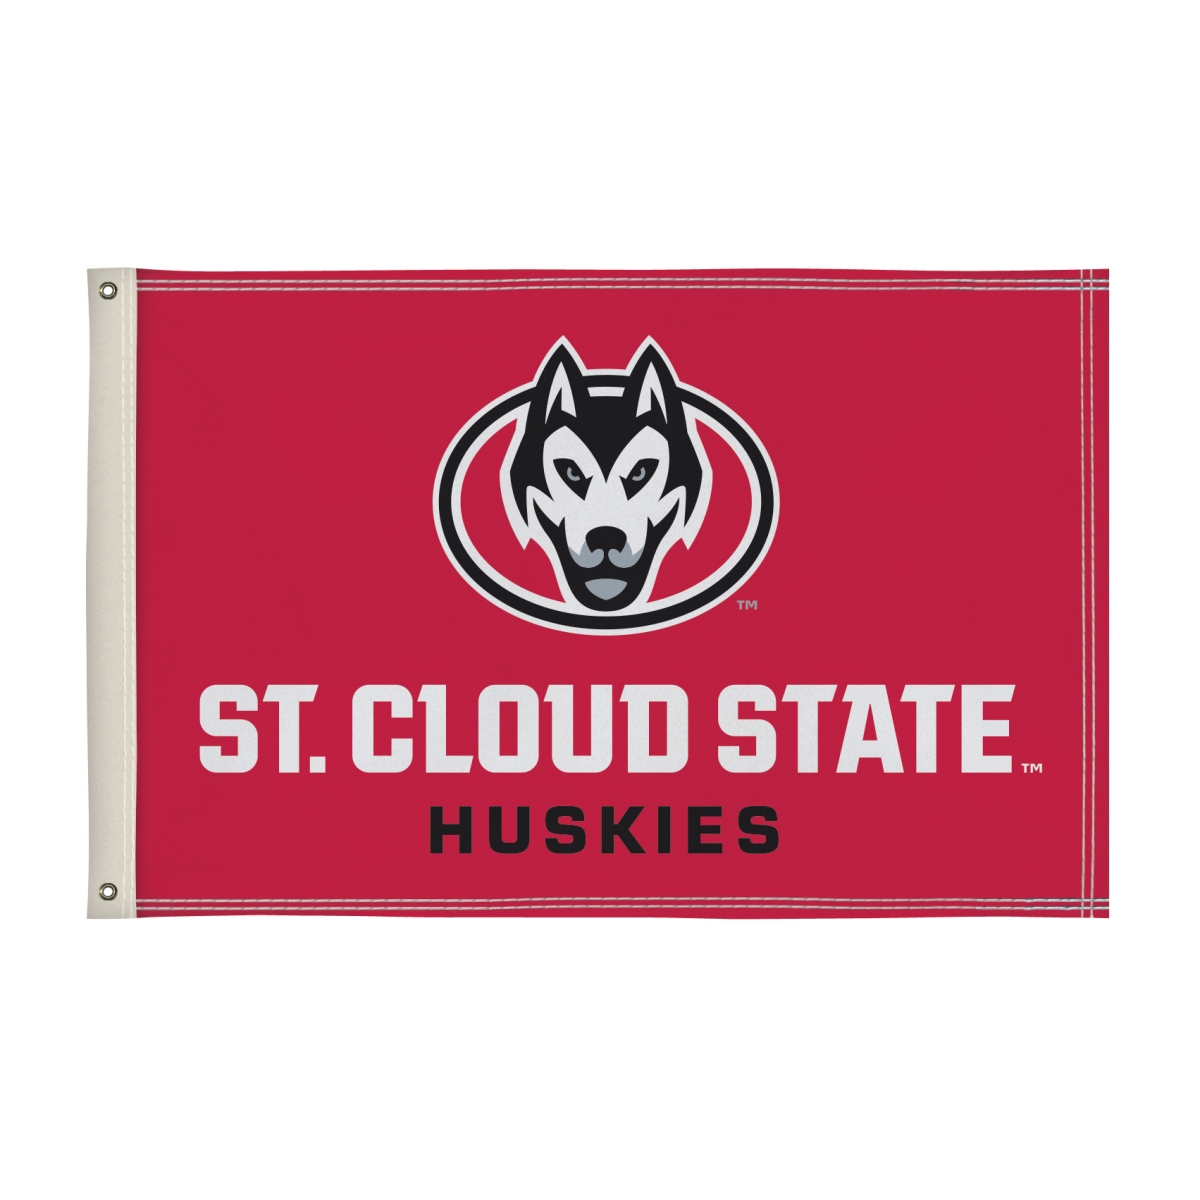 Picture of Showdown Displays 810002SCSU-001 2 x 3 ft. St. Cloud State Huskies NCAA Flag - No.001